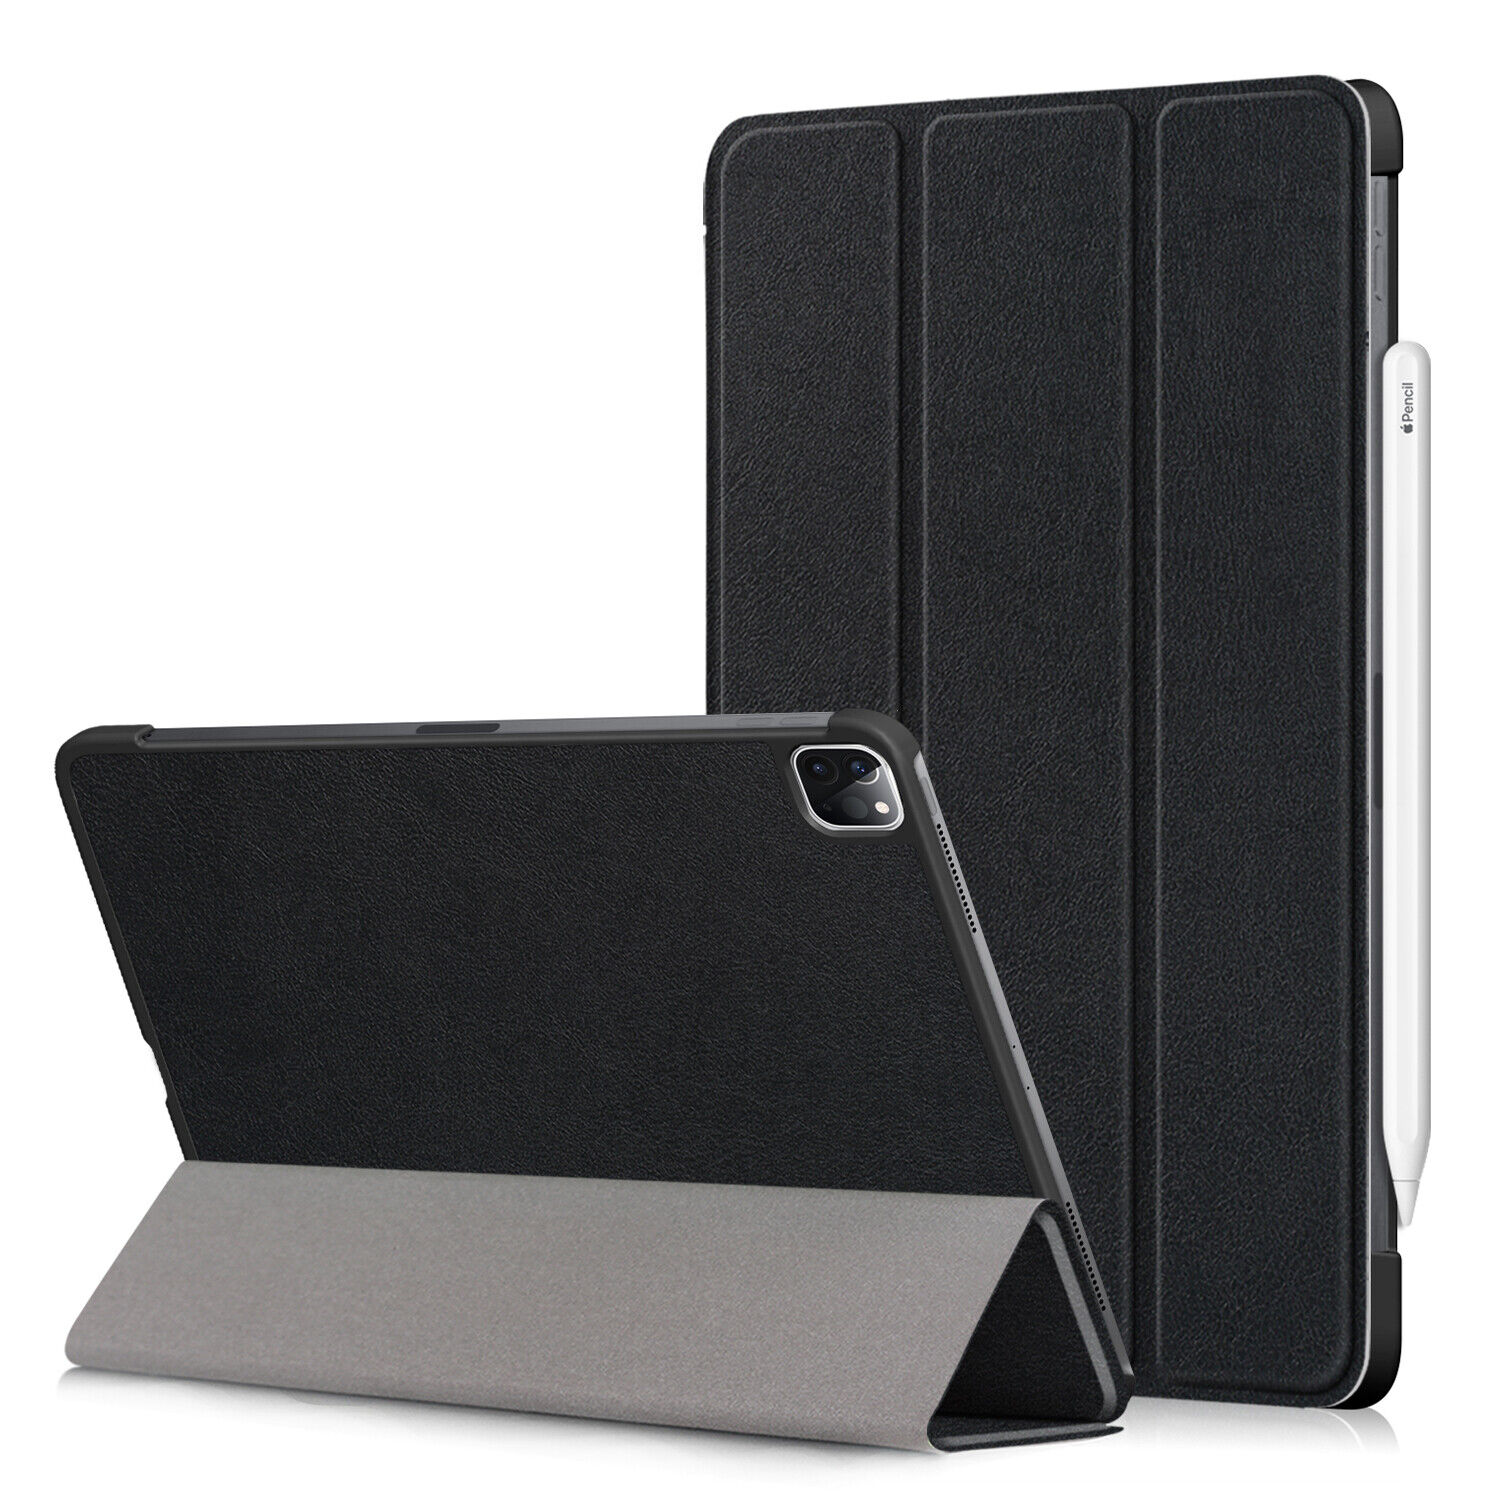 Lightweight Slim Shell Stand Cover Auto Wake/Sleep Case for Apple iPad Air Pro